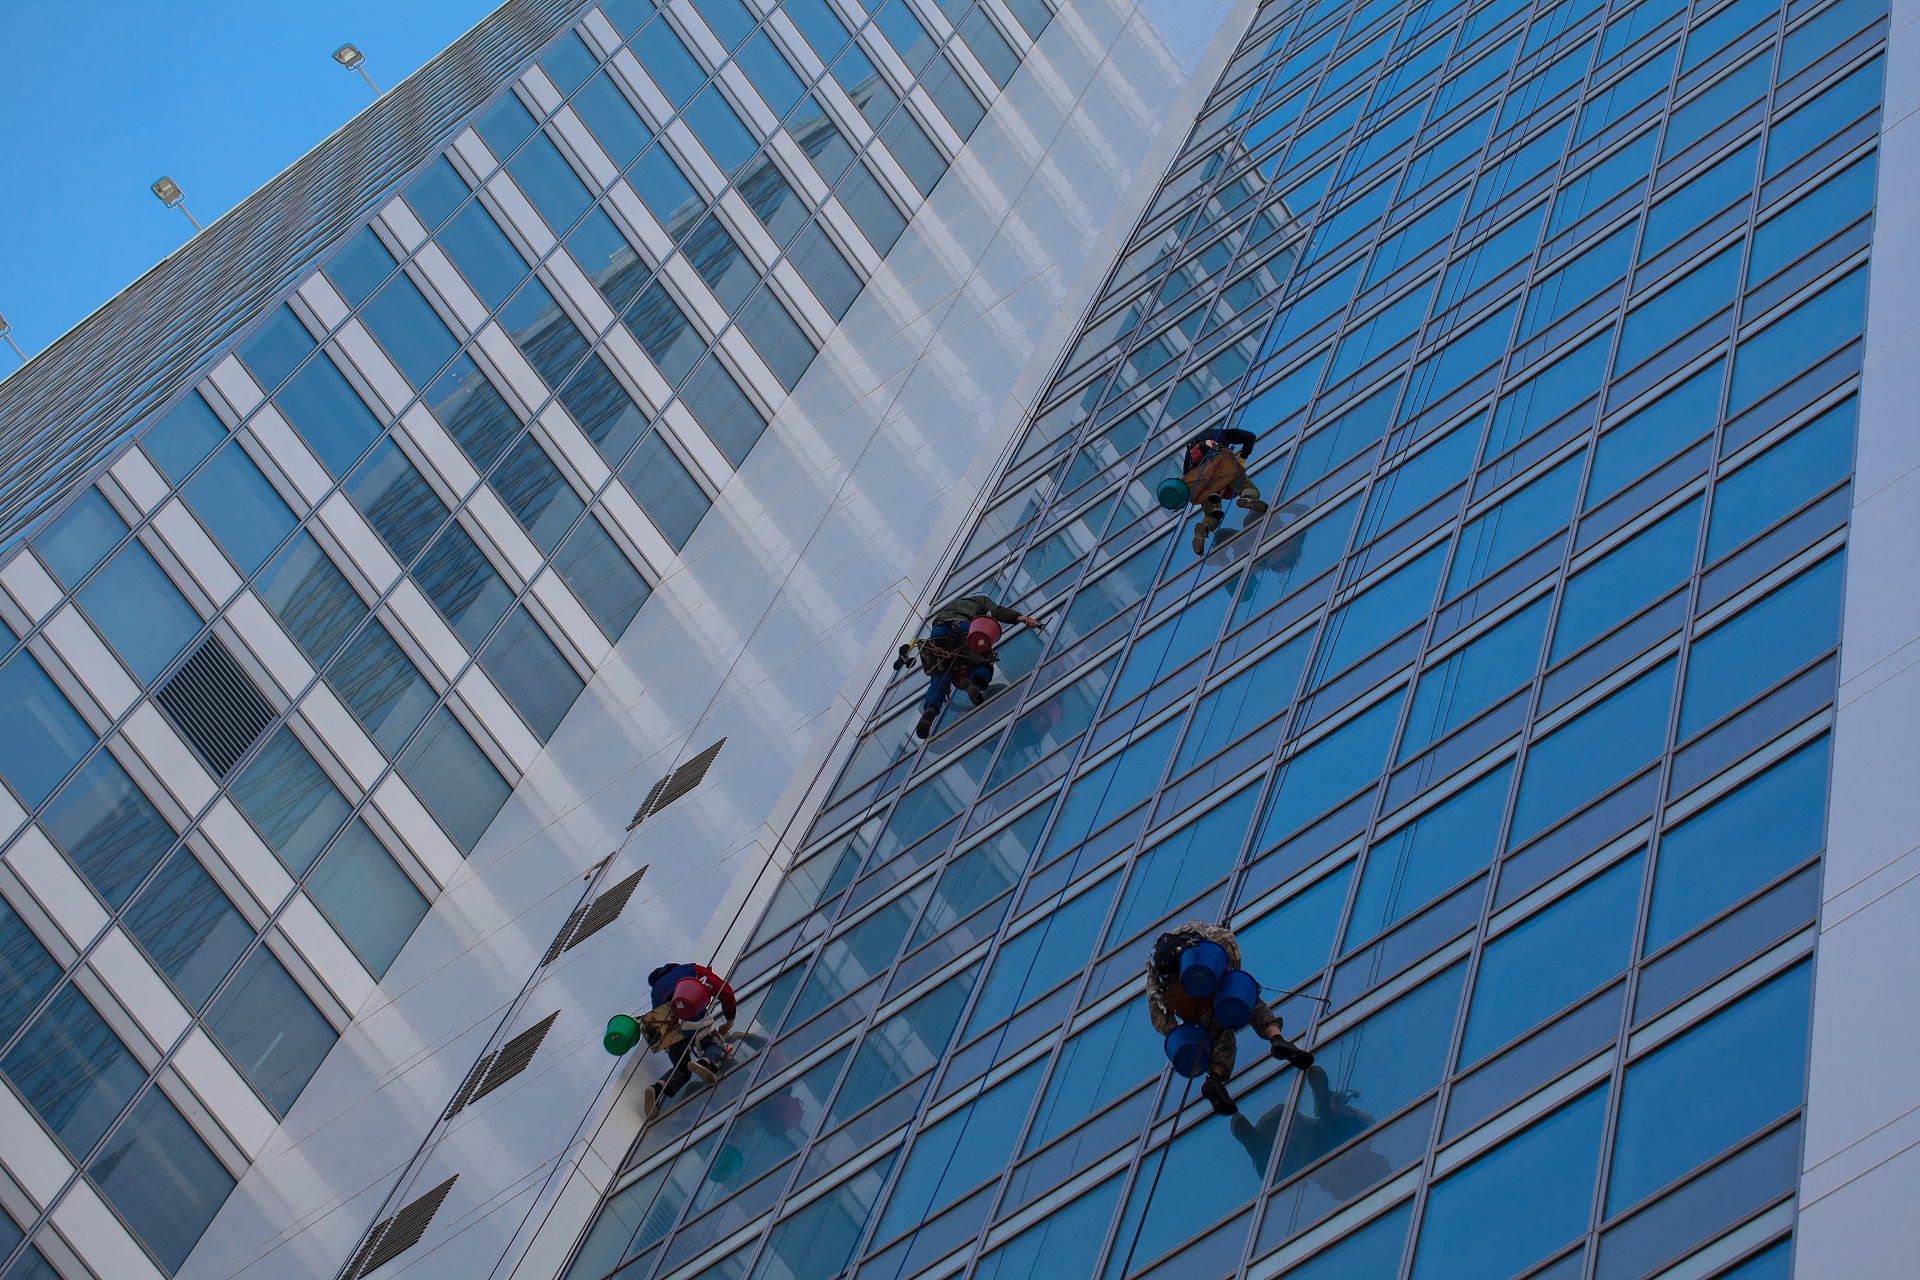 Classy Window Cleaning Services partnering with building managers, property management companies, and new construction firms across Dayton Ohio, Cincinnati Ohio, Hamilton Ohio, Columbus Ohio, and beyond. With service locations throughout the entire Columbus, Ohio region, including Cincinnati and Hamilton Ohio